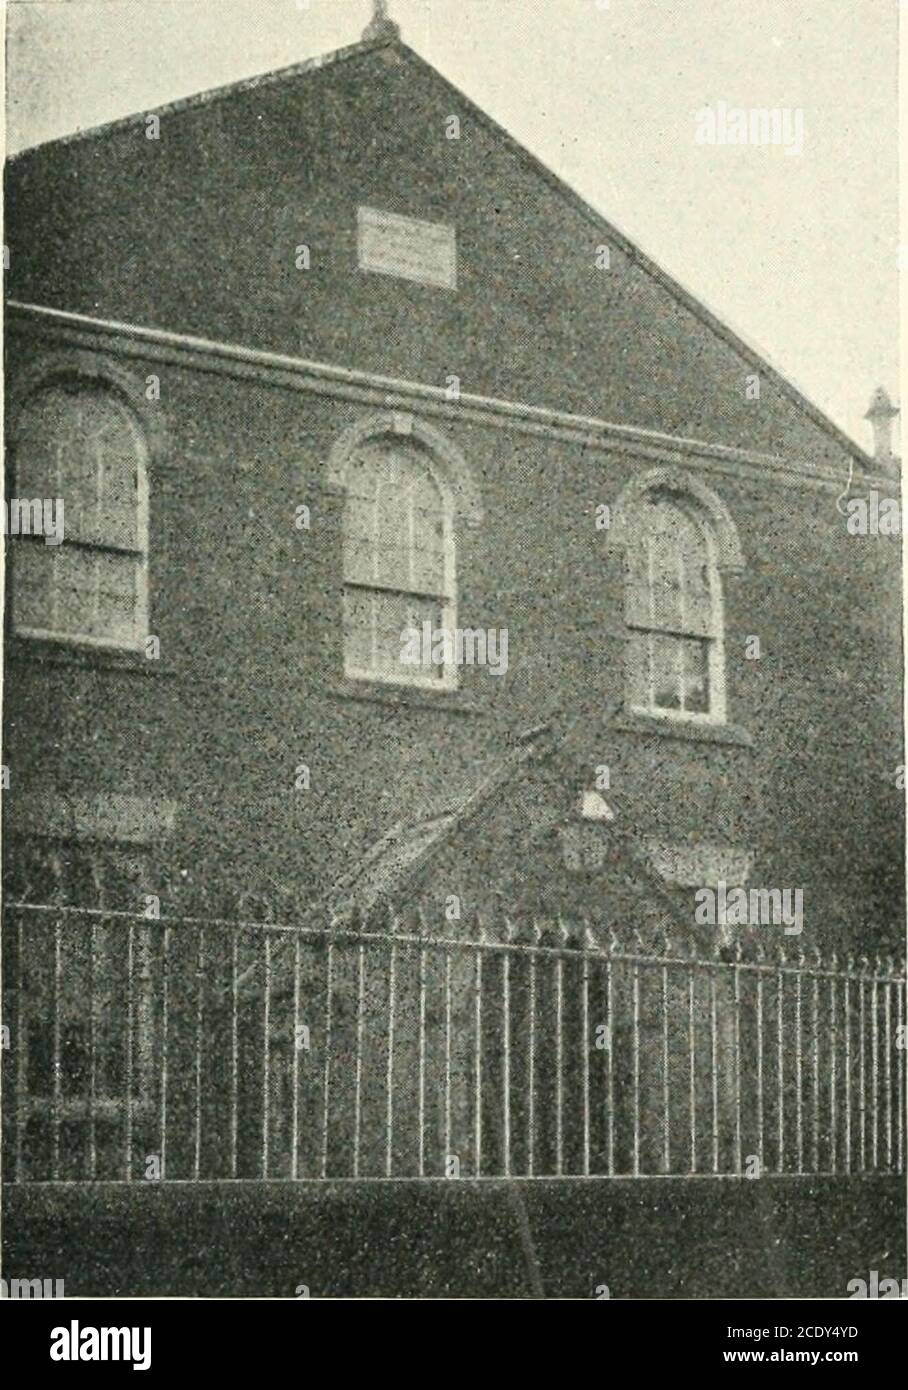 . The origin and history of the primitive Methodist Church . ssioned as early as1817 by a zealous band of Primitives from Weston Underwood. In 1827, it was the tenth place on the plan, with preachingservices appointed for Sunday afternoonsand Friday evenings. In 1832, whatwas at the time considered to be oneof the best chapels in that part ofDerbyshire was erected, and some timelater the old Wesleyan chapel wasacquired for school purposes. Knivetonis of interest from the fact that, thoughit is but an inconsiderable village, it wasin the Forties made the head of a newcircuit and so continued un Stock Photo